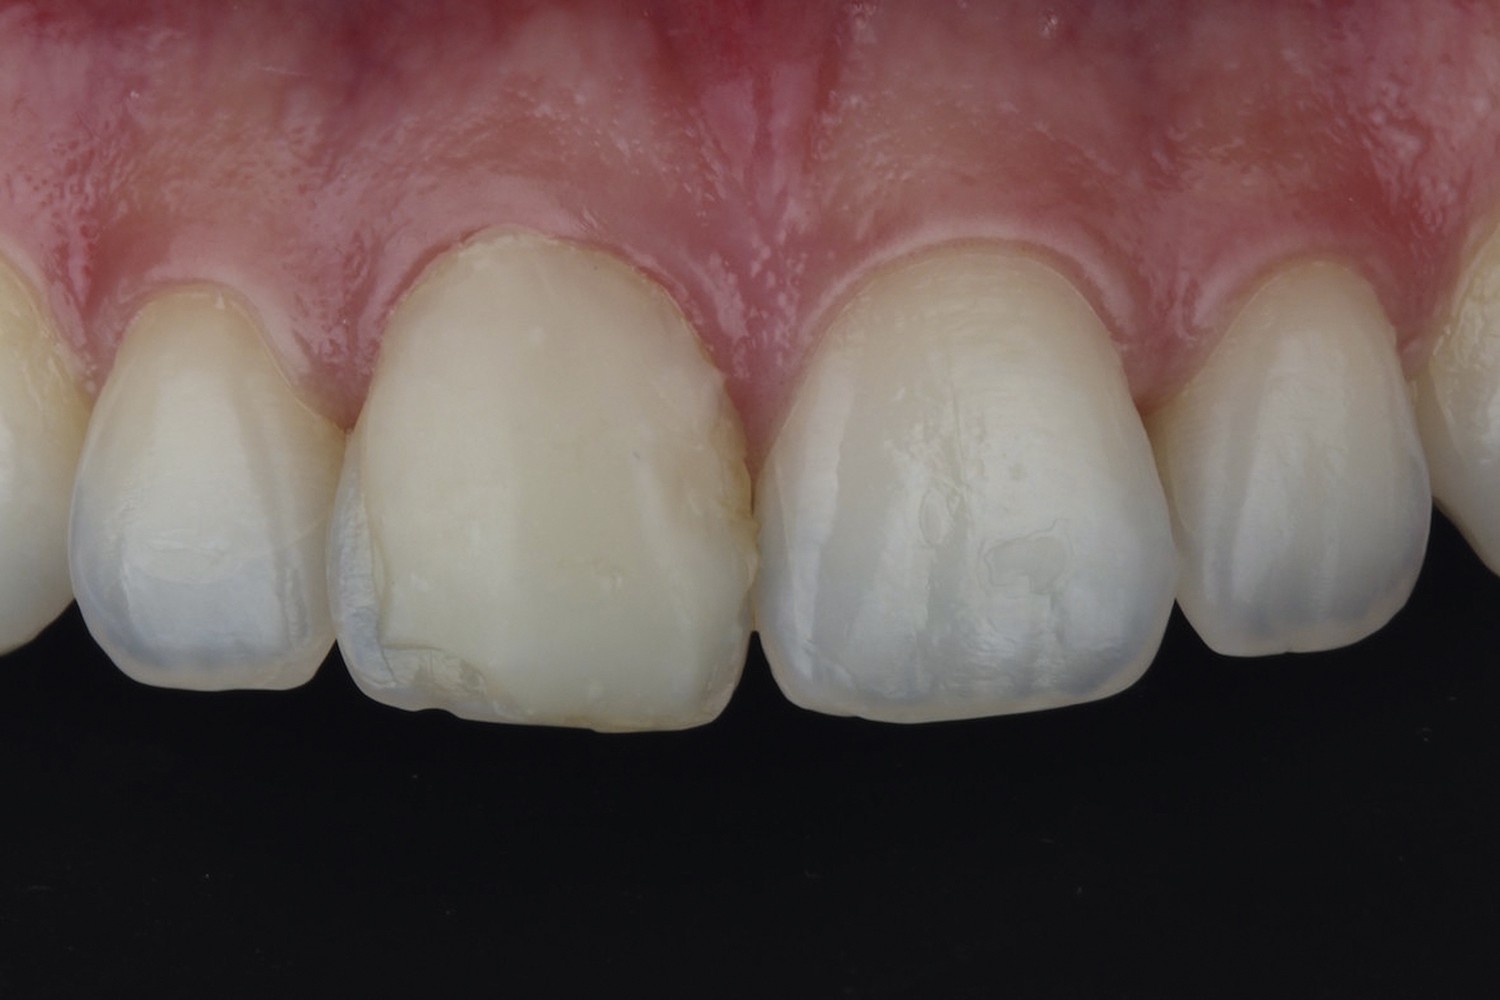 Replacement of single composite resin in a maxillary central incisor: Case report